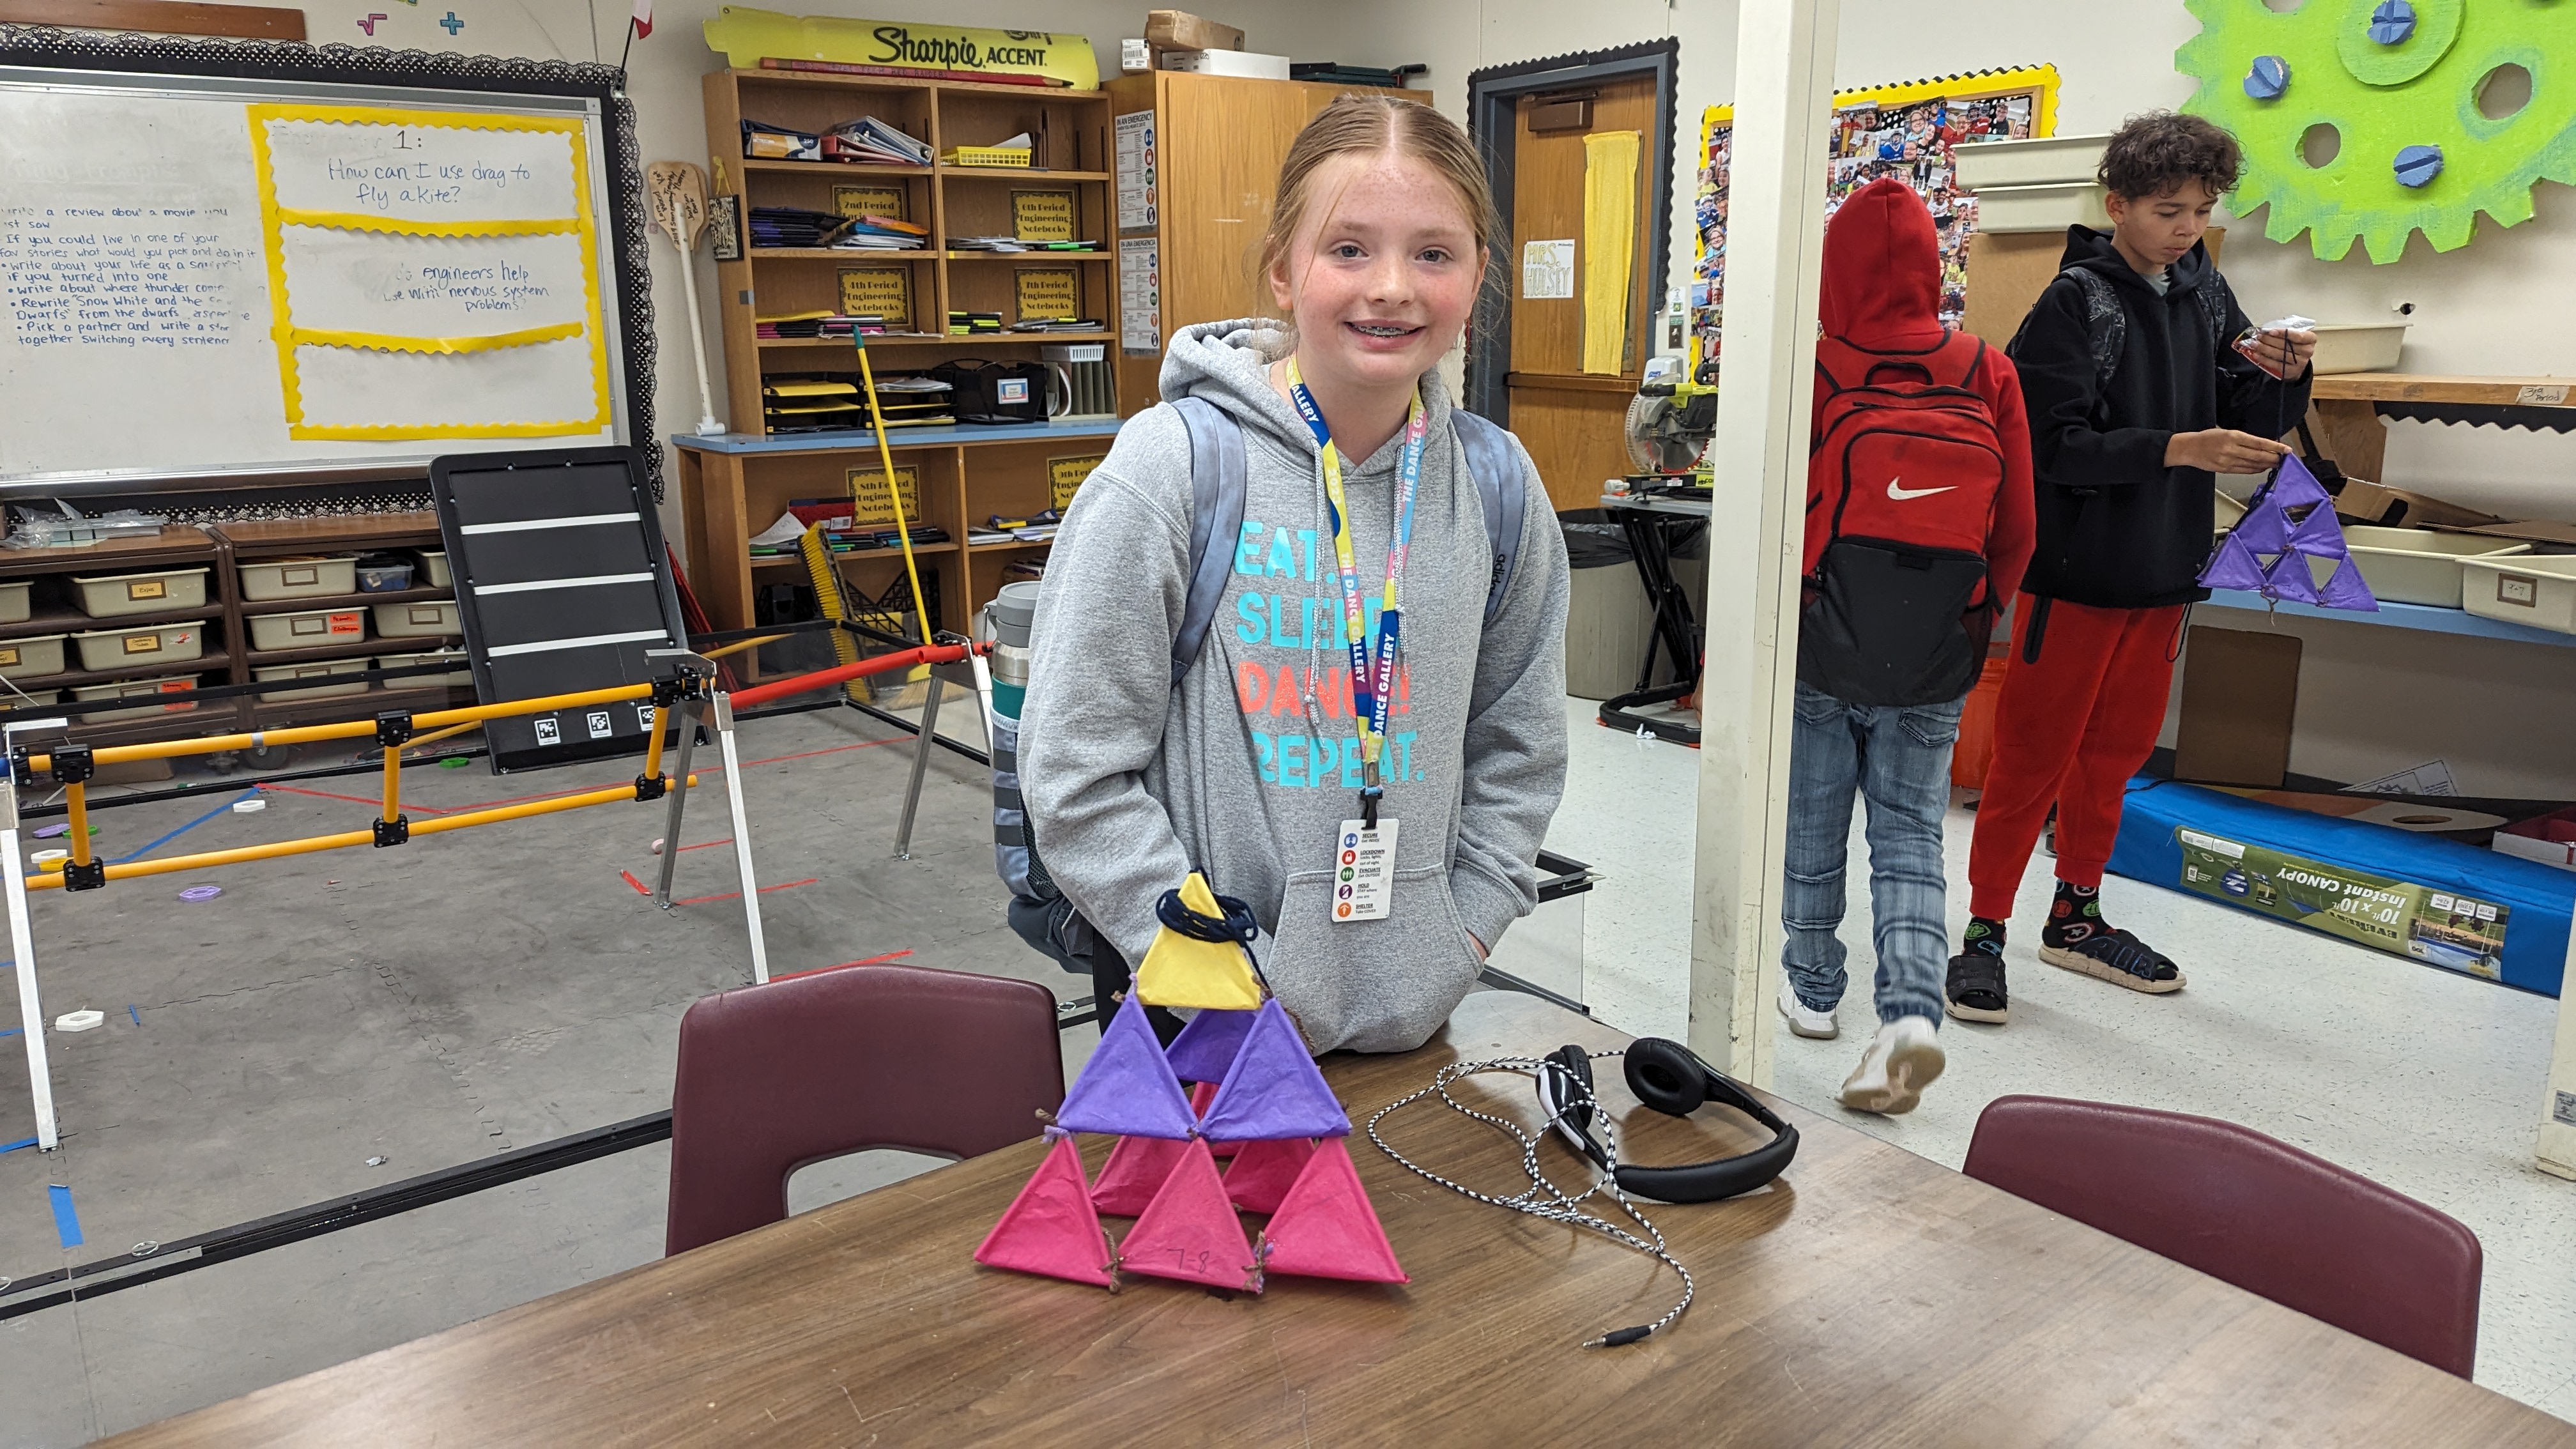 students pose with their completed tetrahedron kite